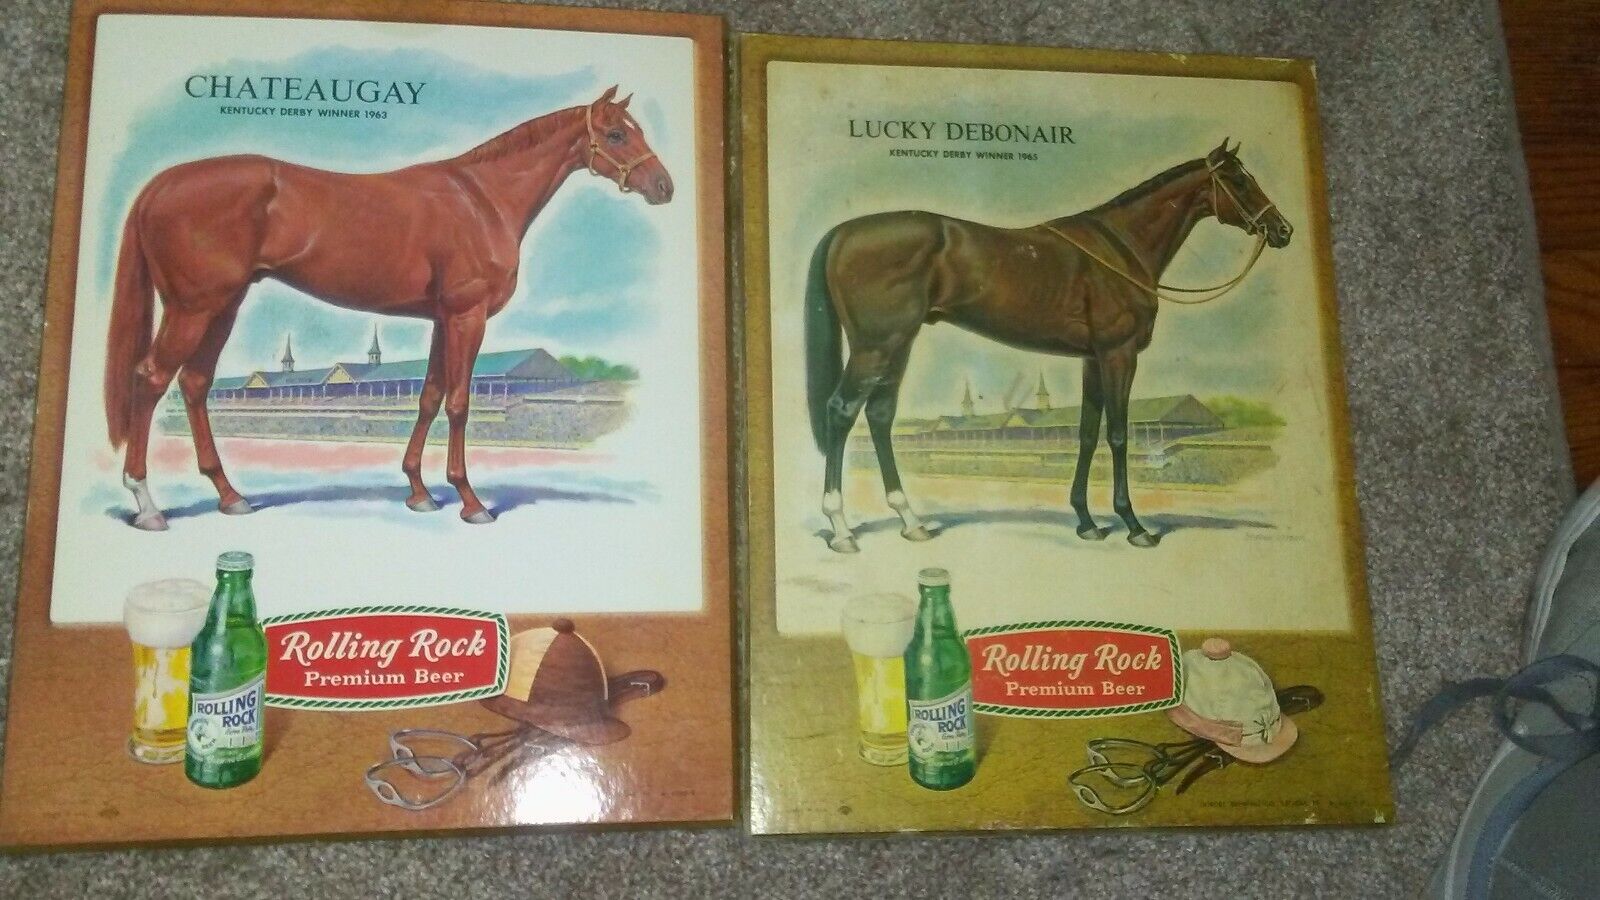 Vintage Rolling Rock Beer Sign Lot Race 🐎 Chateaugay , Lucky Debonair Rare ROLLING ROCK